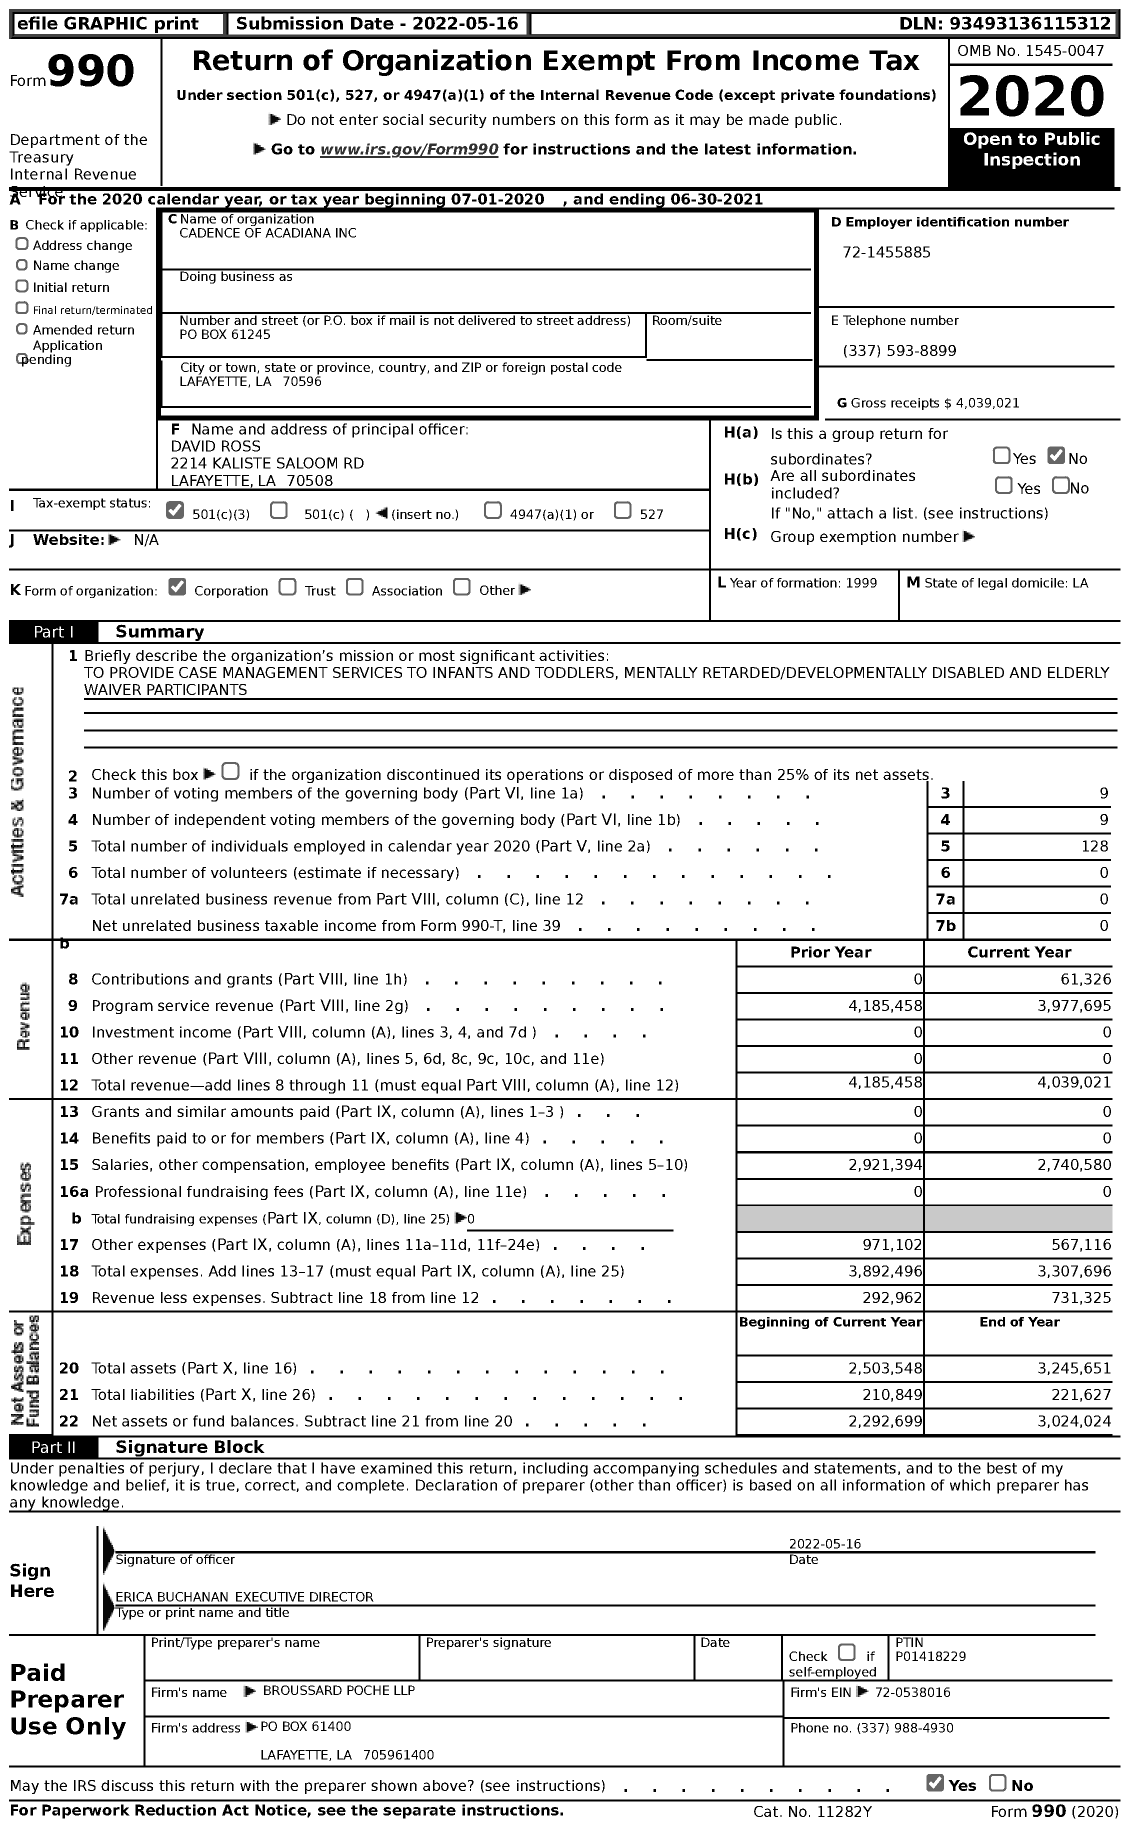 Image of first page of 2020 Form 990 for Cadence of Acadiana